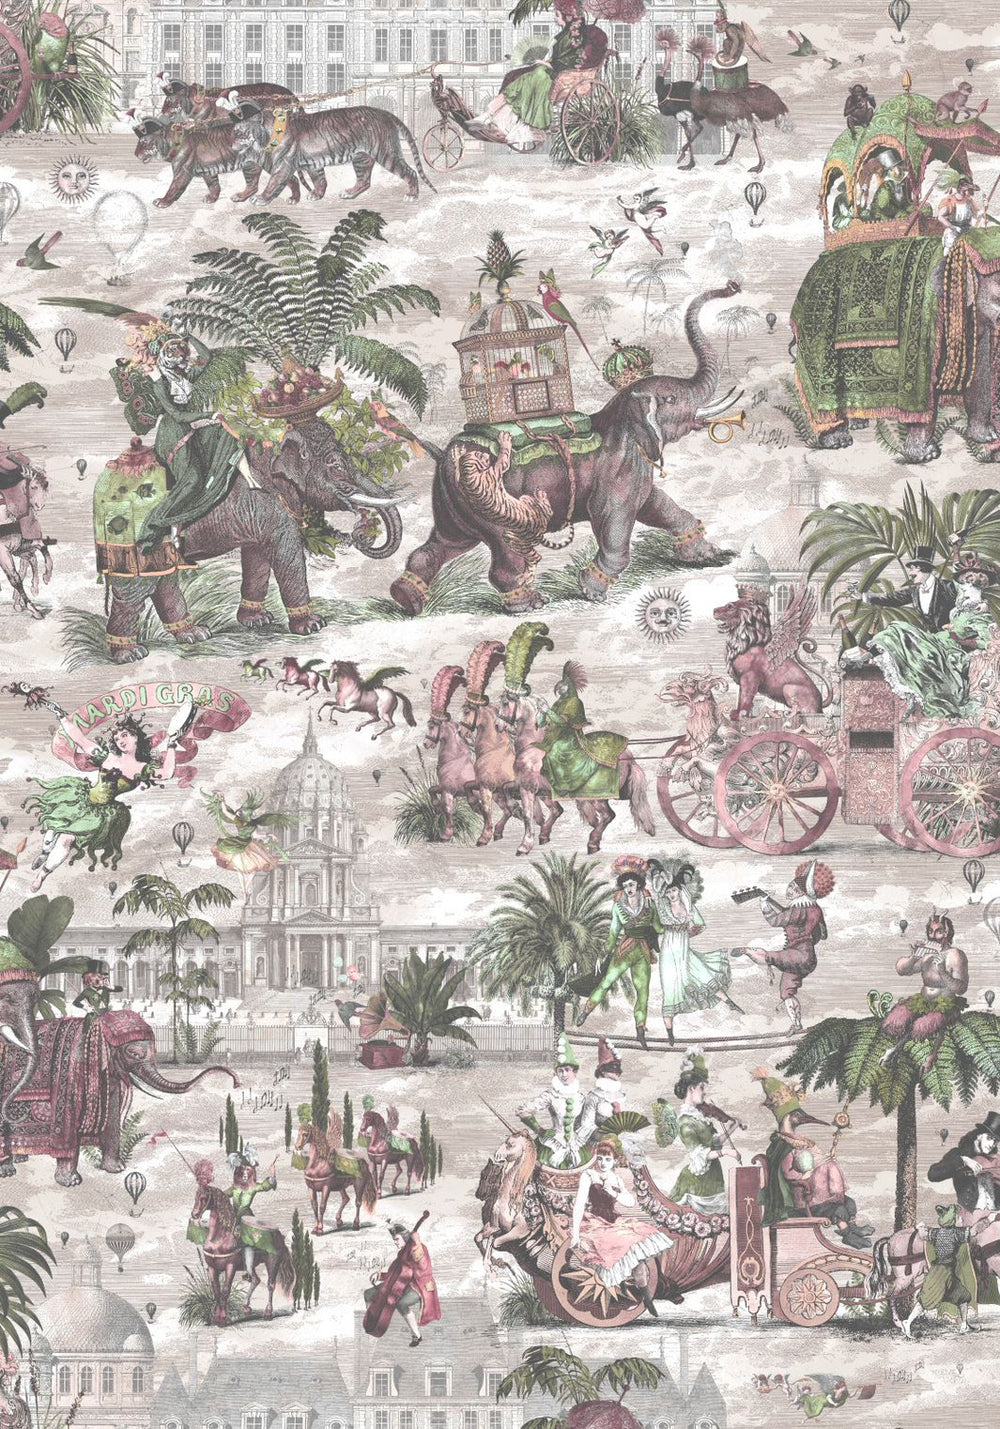 brand-mckenzie-carnival-fever-carnival-march-fiesta-whimsical-classical-wallpaper-wallcovering-seawater-peachbrand-mckenzie-carnival-fever-carnival-march-fiesta-whimsical-classical-wallpaper-wallcovering-rose-forest-pink-green